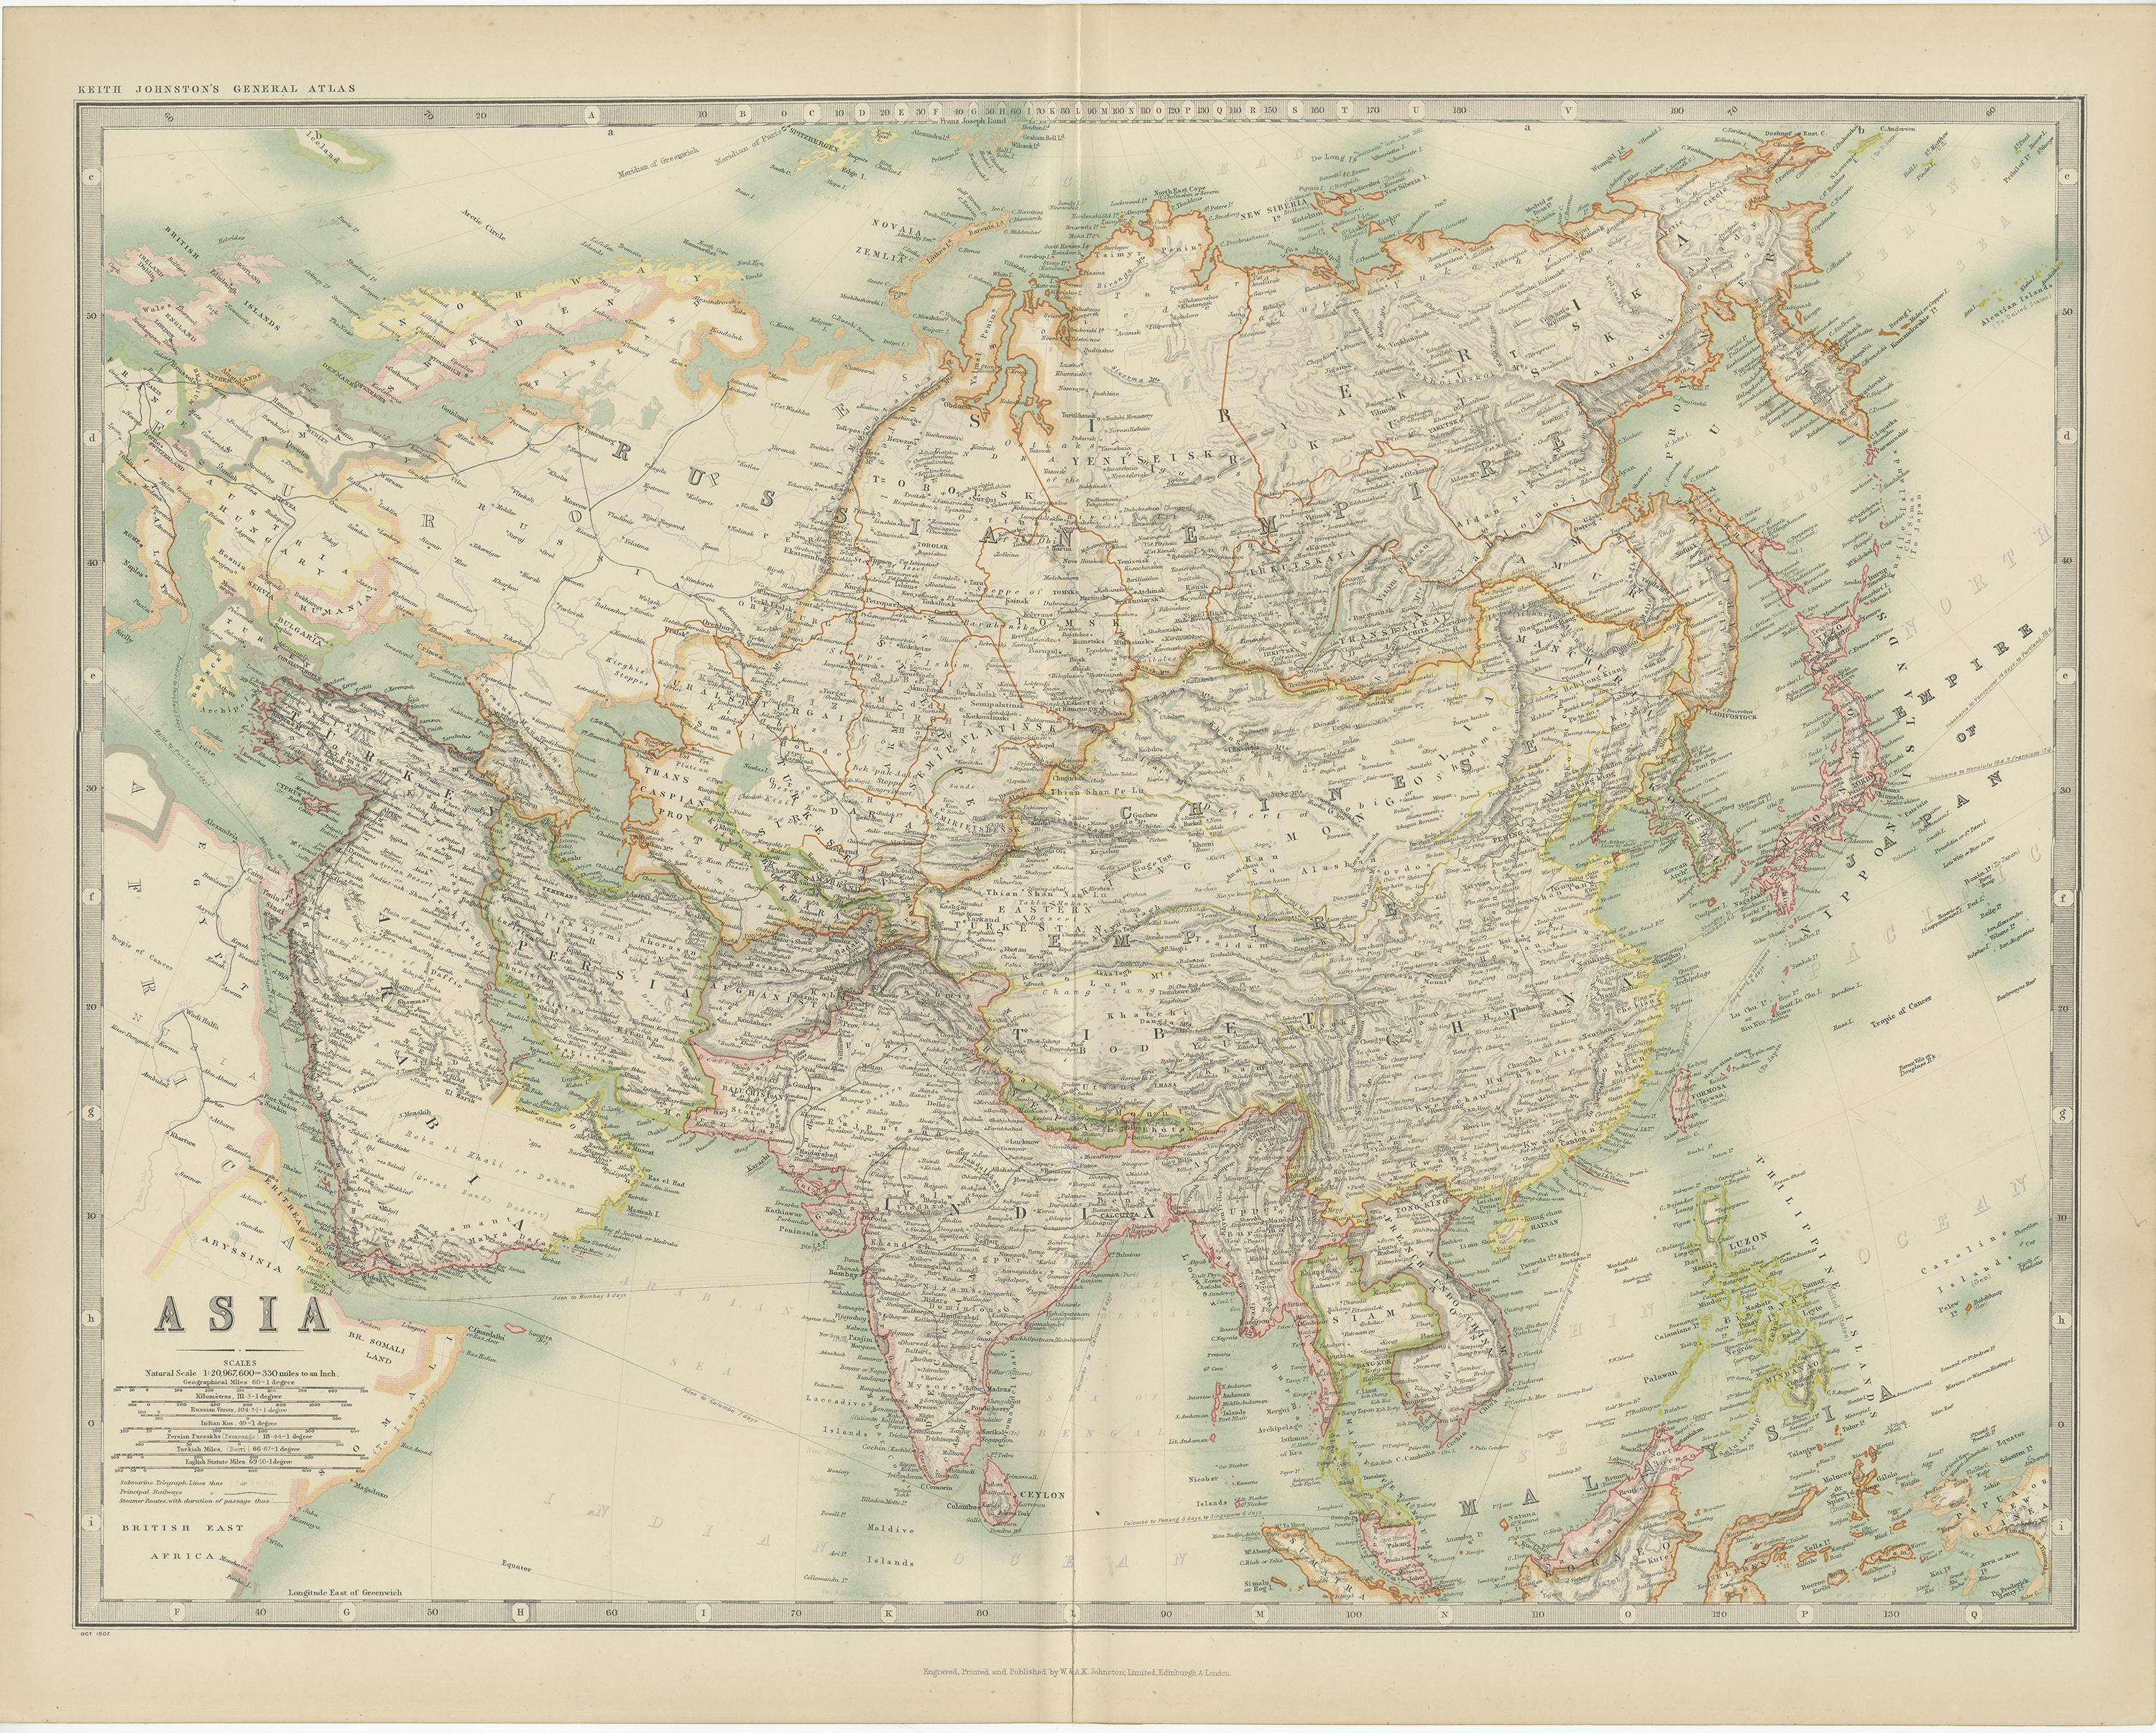 Antique map titled 'Asia'. Depicting China, Japan, Indonesia, India, Arabia and more. This map originates from the ‘Royal Atlas of Modern Geography’. Published by W. & A.K. Johnston, 1909.